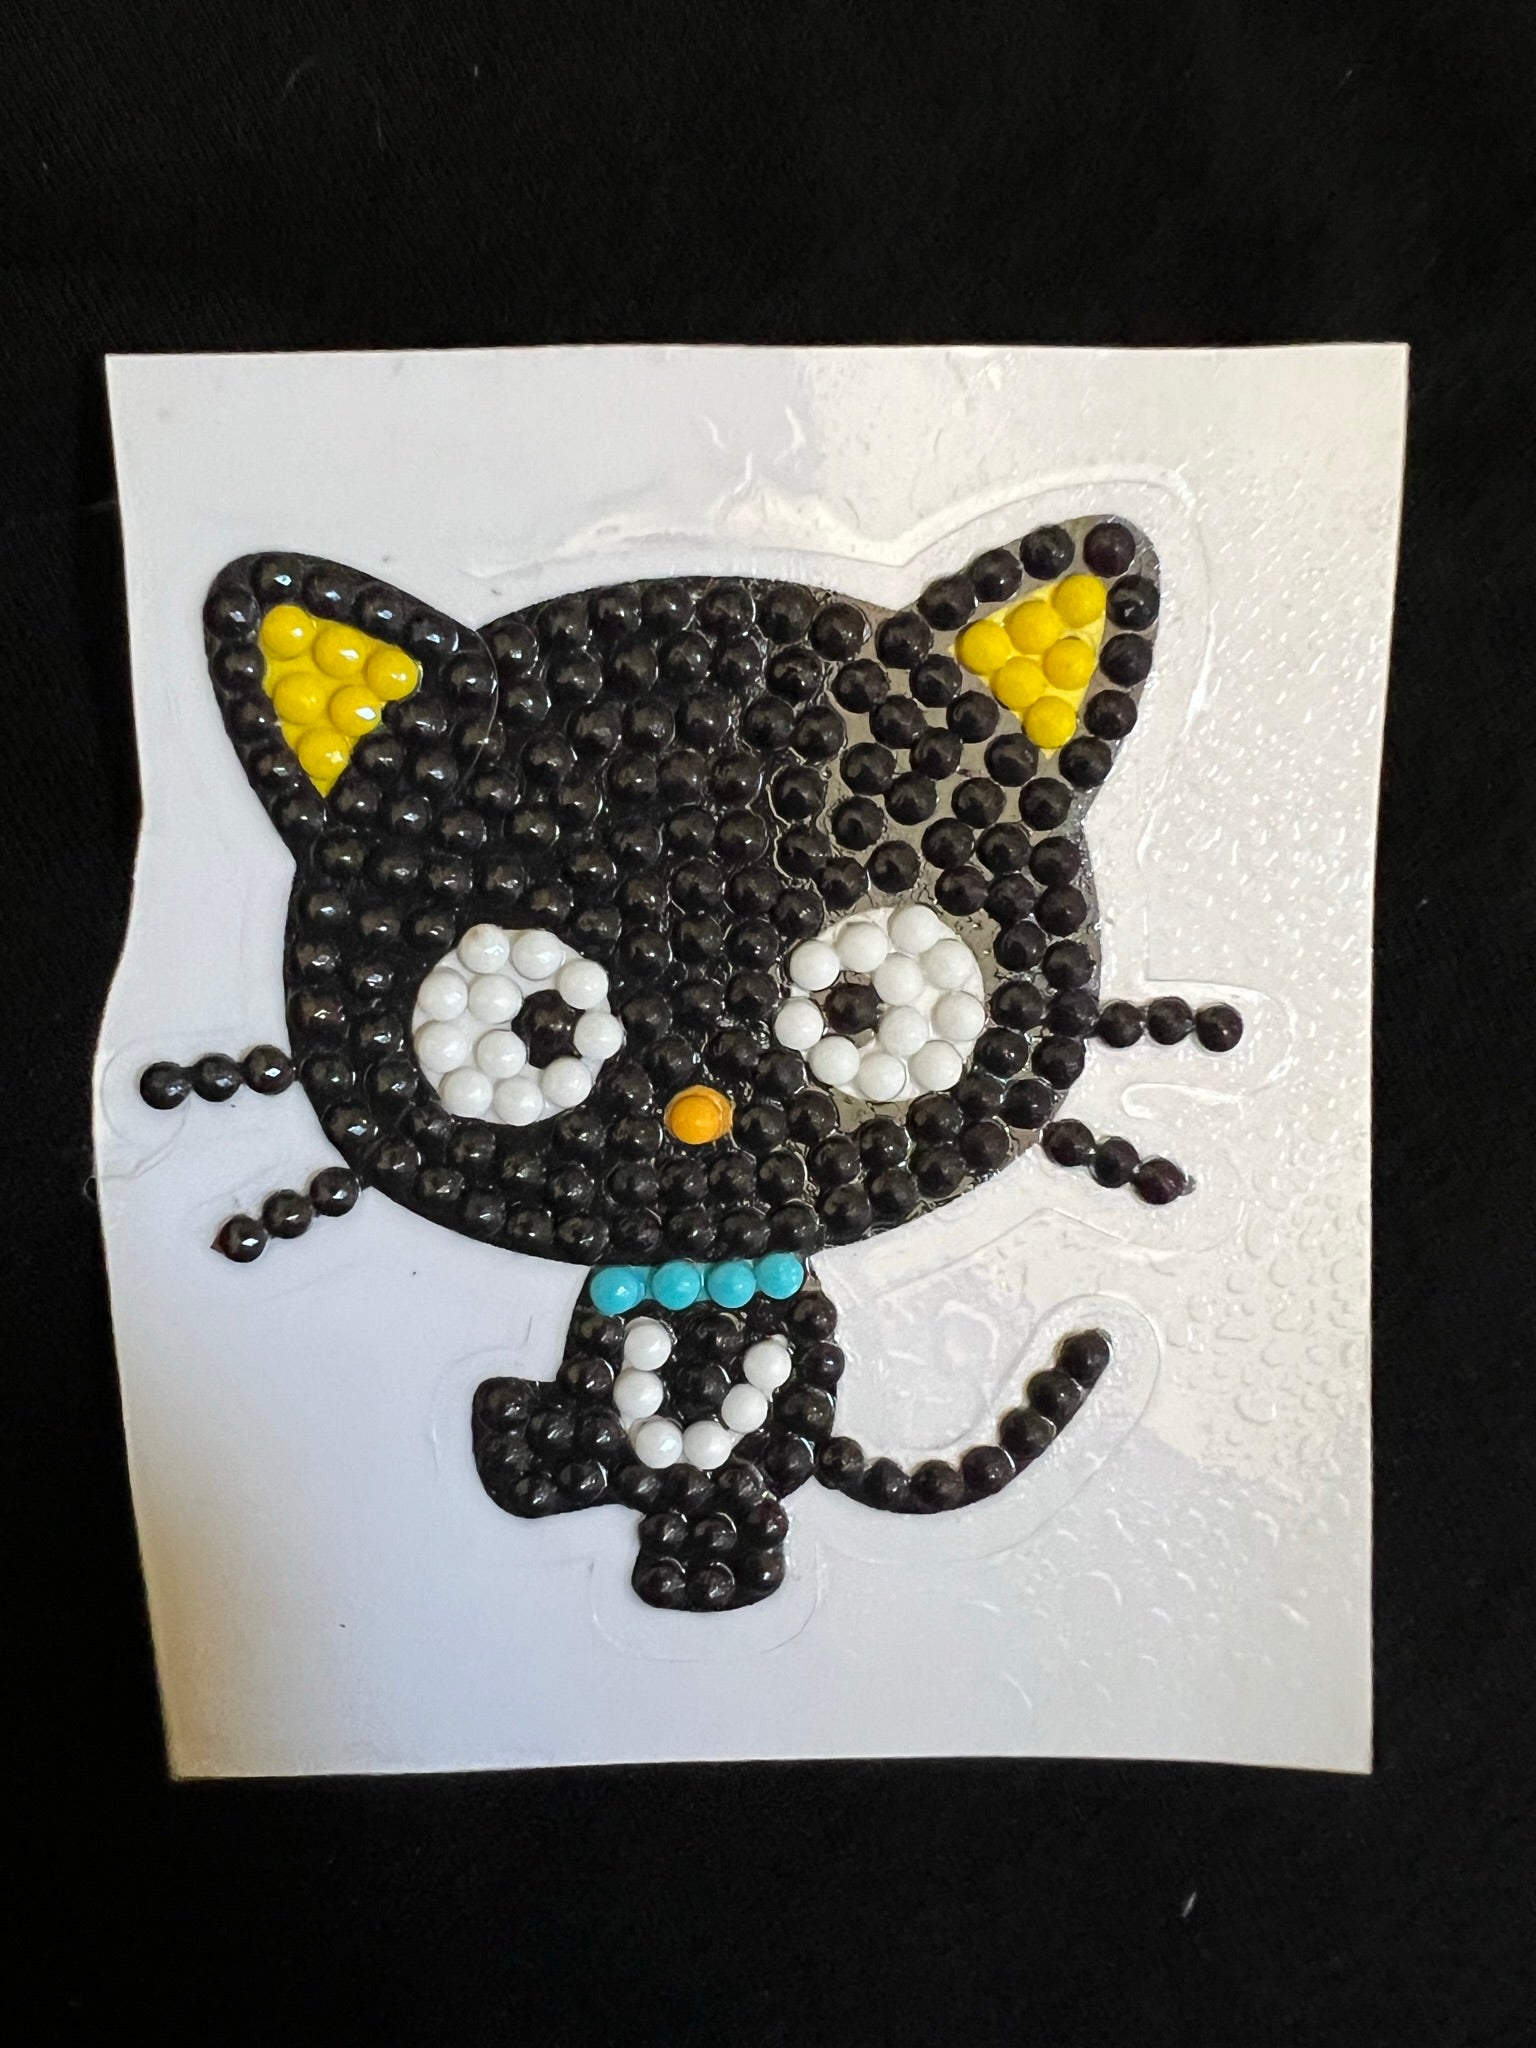 Chococat Stickers (1996), flying_narwhal